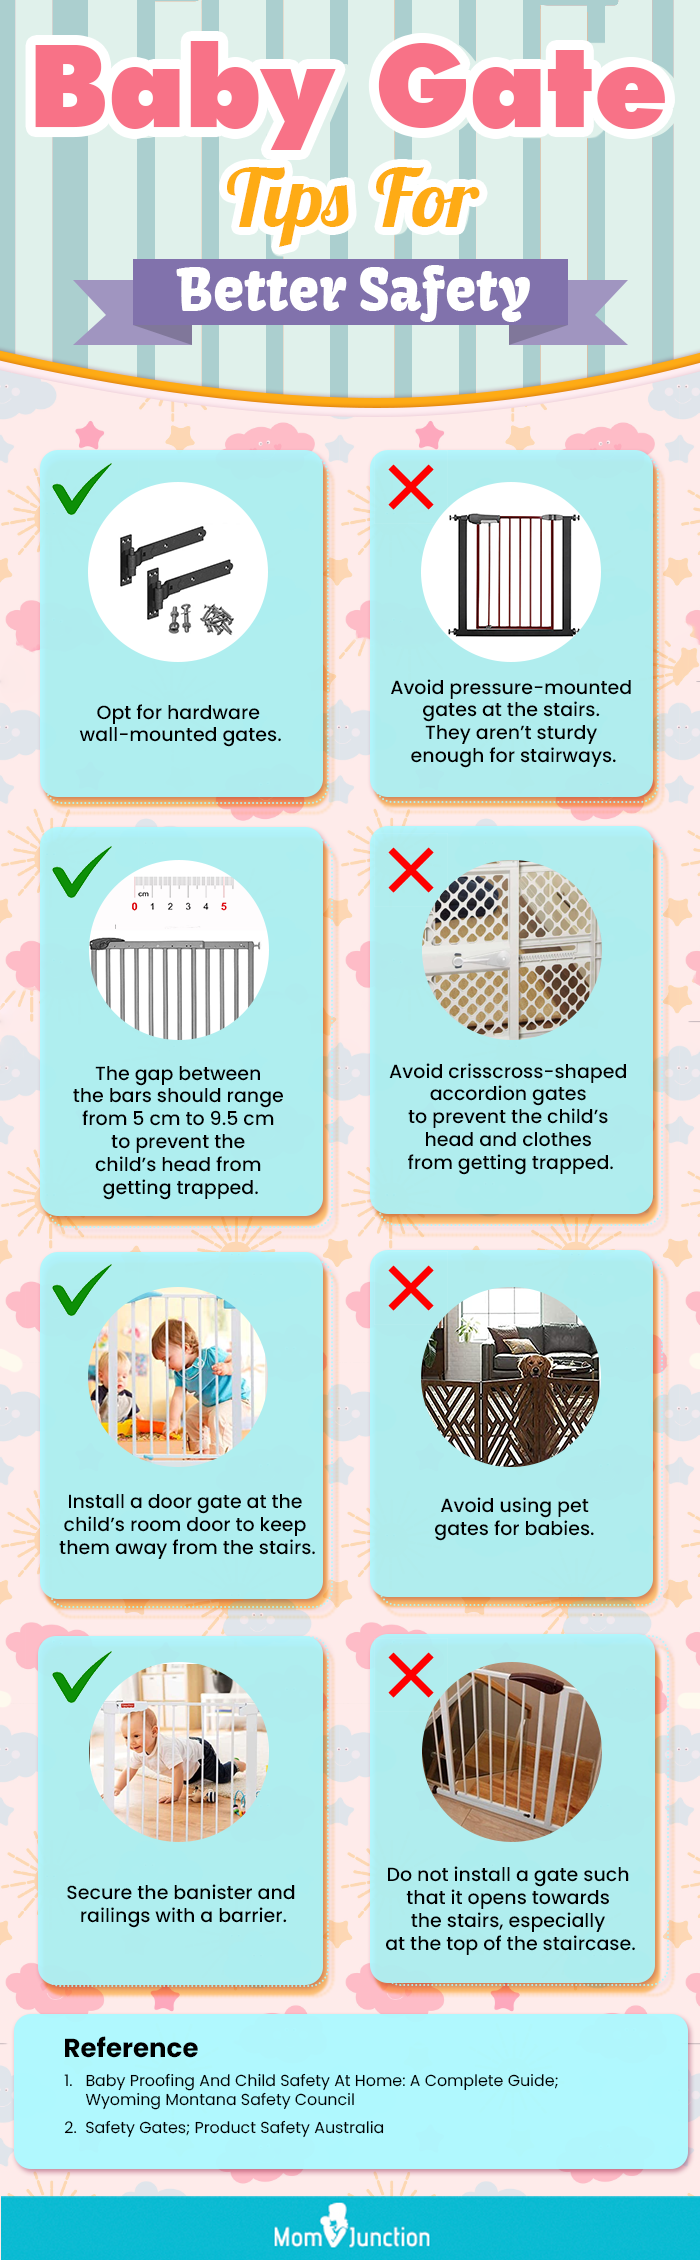 Baby Gate Tips For Better Safety